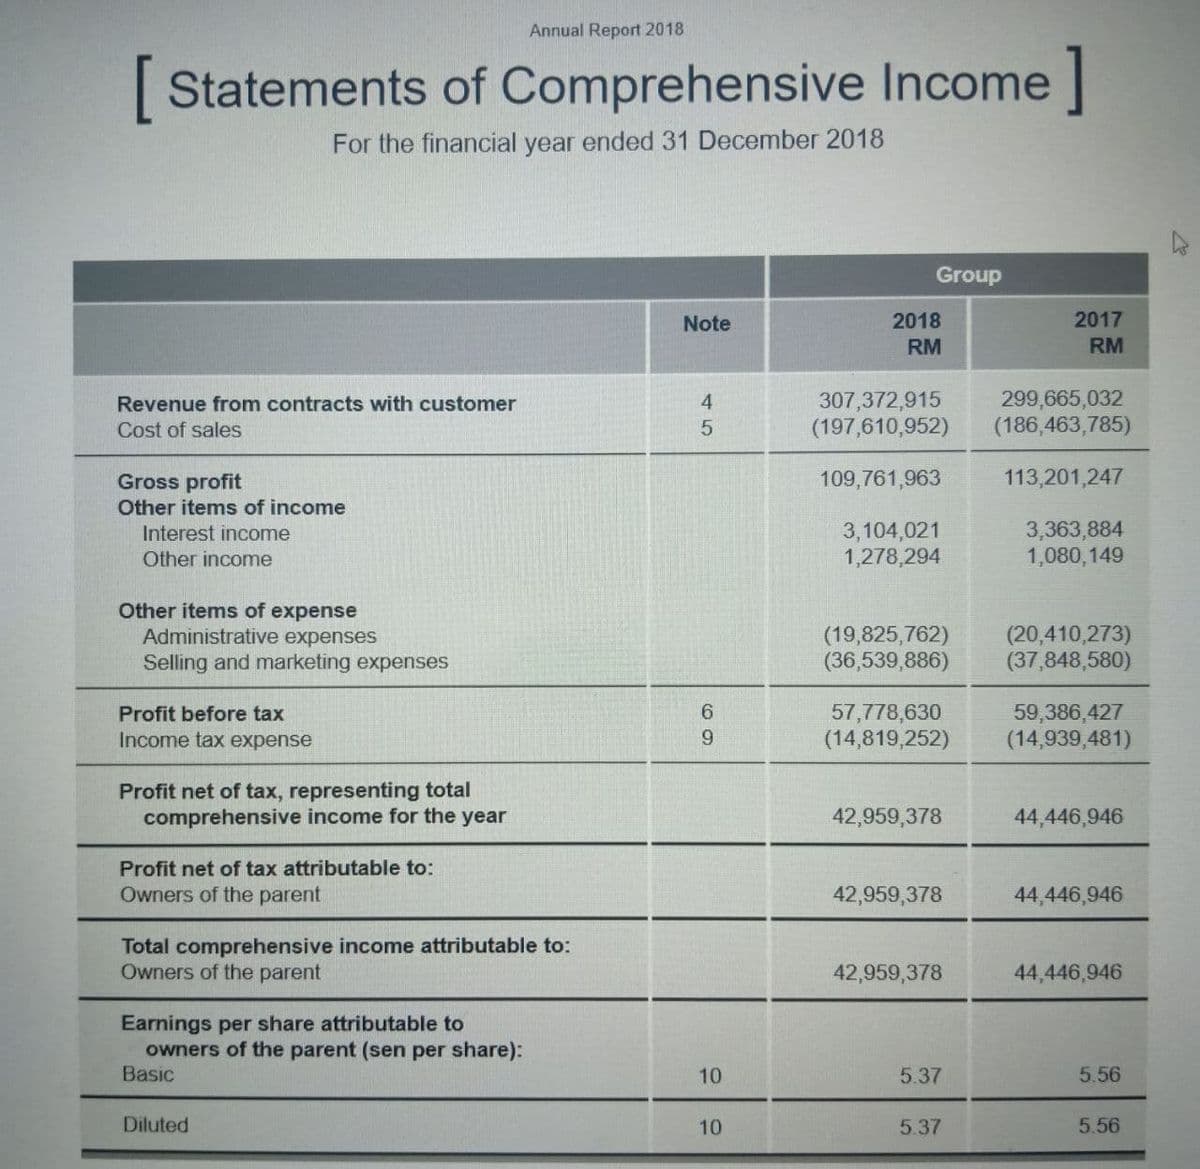 Annual Report 2018
[Statements of Comprehensive Income
For the financial year ended 31 December 2018
Group
2017
2018
RM
Note
RM
307,372,915
(197,610,952)
299,665,032
(186,463,785)
Revenue from contracts with customer
Cost of sales
Gross profit
109,761,963
113,201,247
Other items of income
3,104,021
1,278,294
3,363,884
1,080,149
Interest income
Other income
Other items of expense
Administrative expenses
Selling and marketing expenses
(19,825,762)
(36,539,886)
(20,410,273)
(37,848,580)
57,778,630
(14,819,252)
59,386,427
(14,939,481)
Profit before tax
Income tax expense
Profit net of tax, representing total
comprehensive income for the year
42,959,378
44,446,946
Profit net of tax attributable to:
Owners of the parent
42,959,378
44,446,946
Total comprehensive income attributable to:
Owners of the parent
42,959,378
44,446,946
Earnings per share attributable to
owners of the parent (sen per share):
Basic
10
5.37
5.56
Diluted
10
5.37
5.56
45
69
